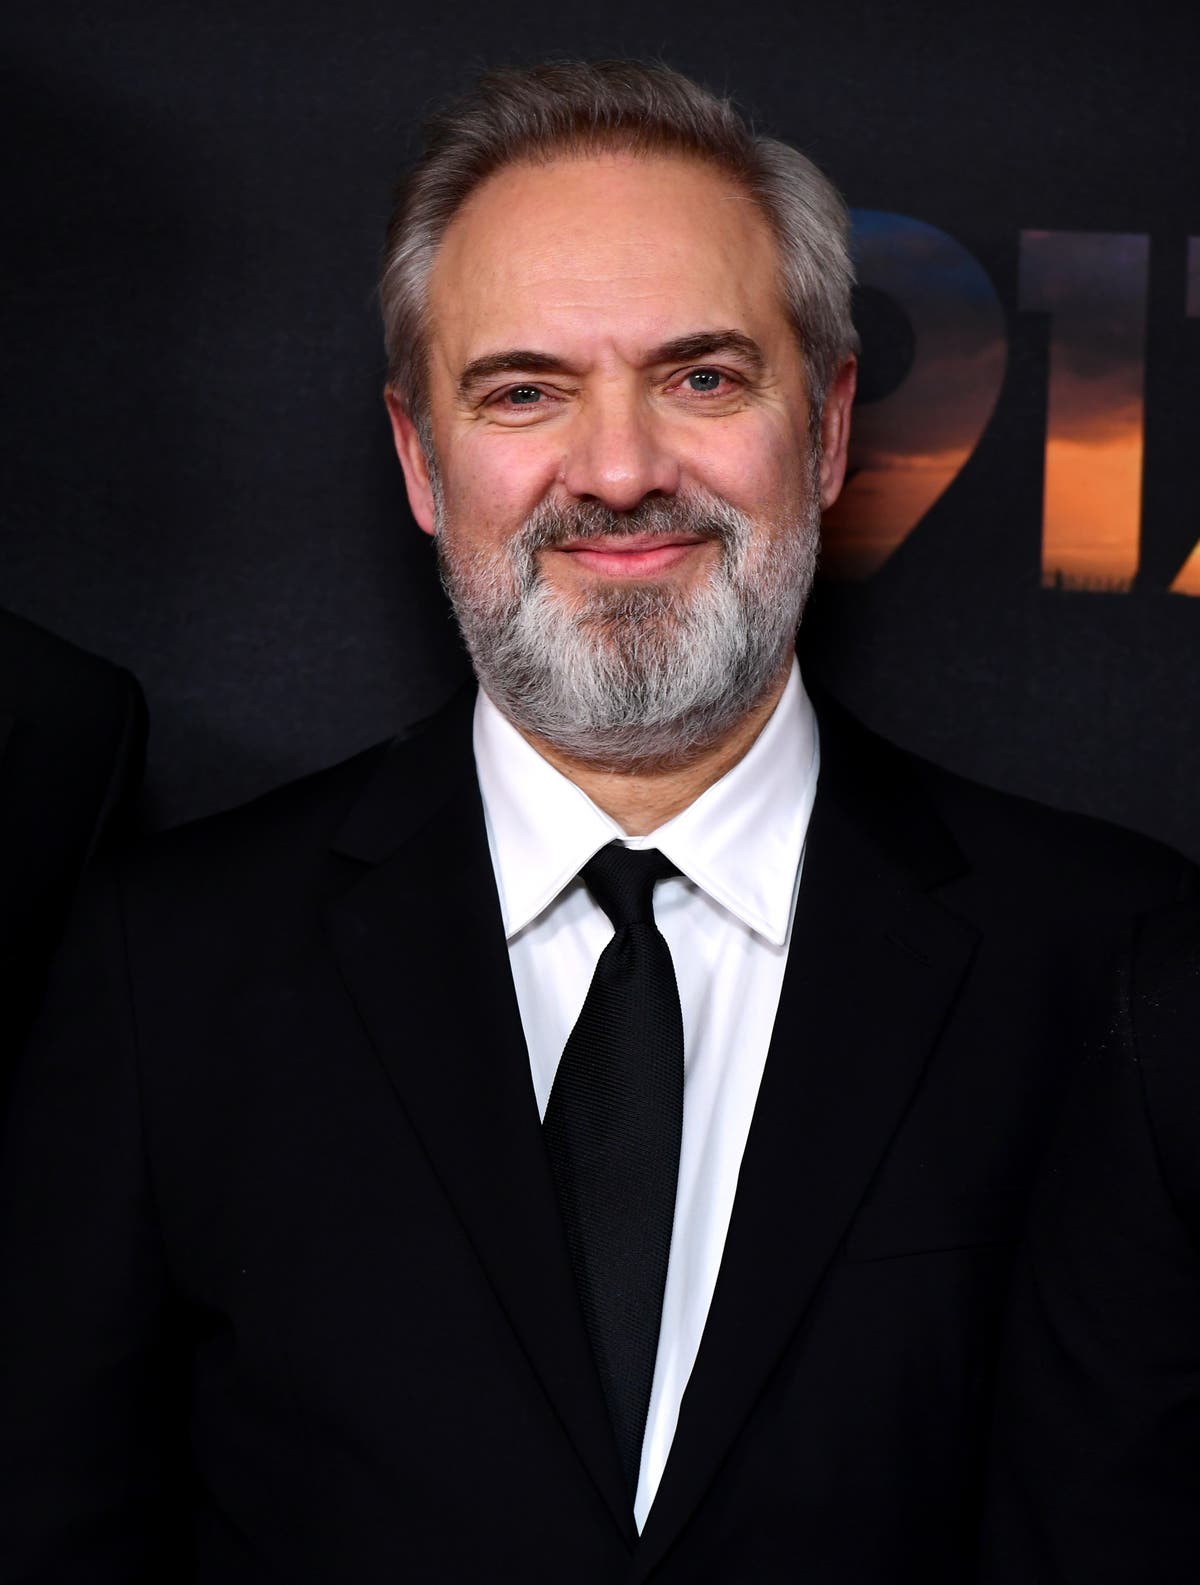 Oscar-winning director Sir Sam Mendes to be knighted at Windsor Castle